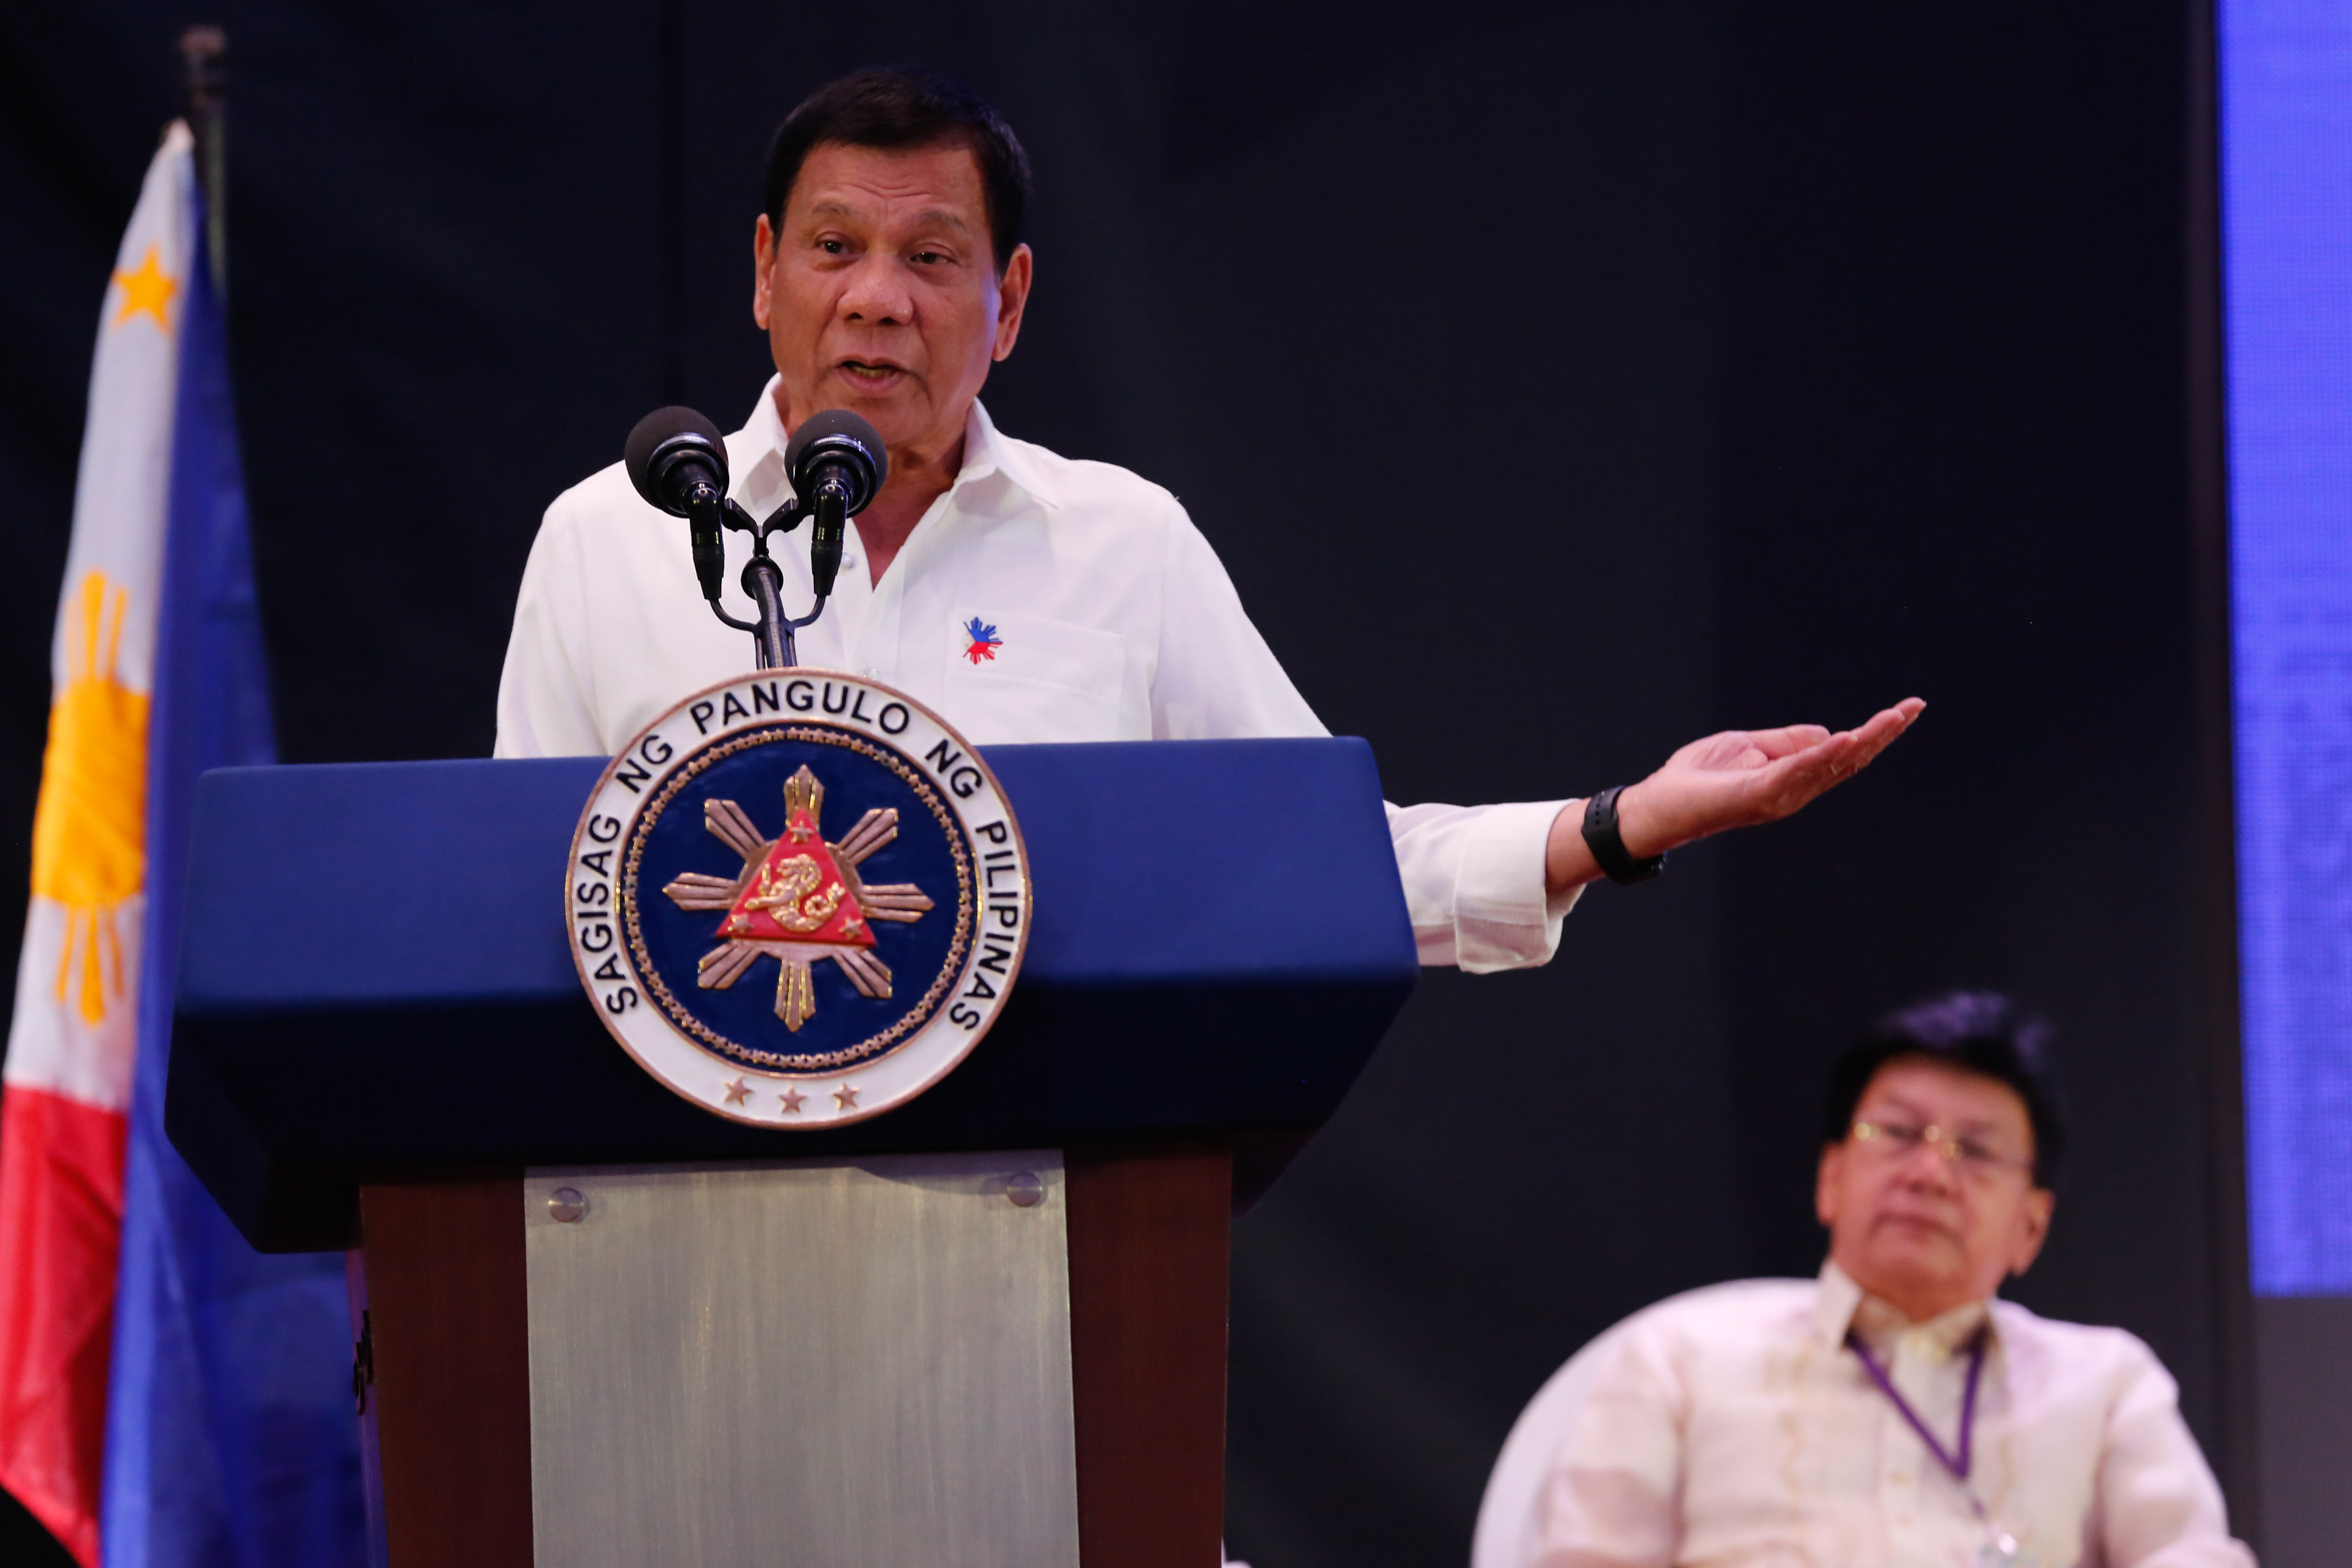 RULE OF LAW. President Rodrigo Duterte talks about Mindanao history, the peace process, and his campaign against illegal drugs and corruption during the Regional Convention of the Integrated Bar of the Philippines Greater Manila Chapter at the Manila Hotel on November 4, 2016. File photo by Toto Lozano/Presidential Photo  